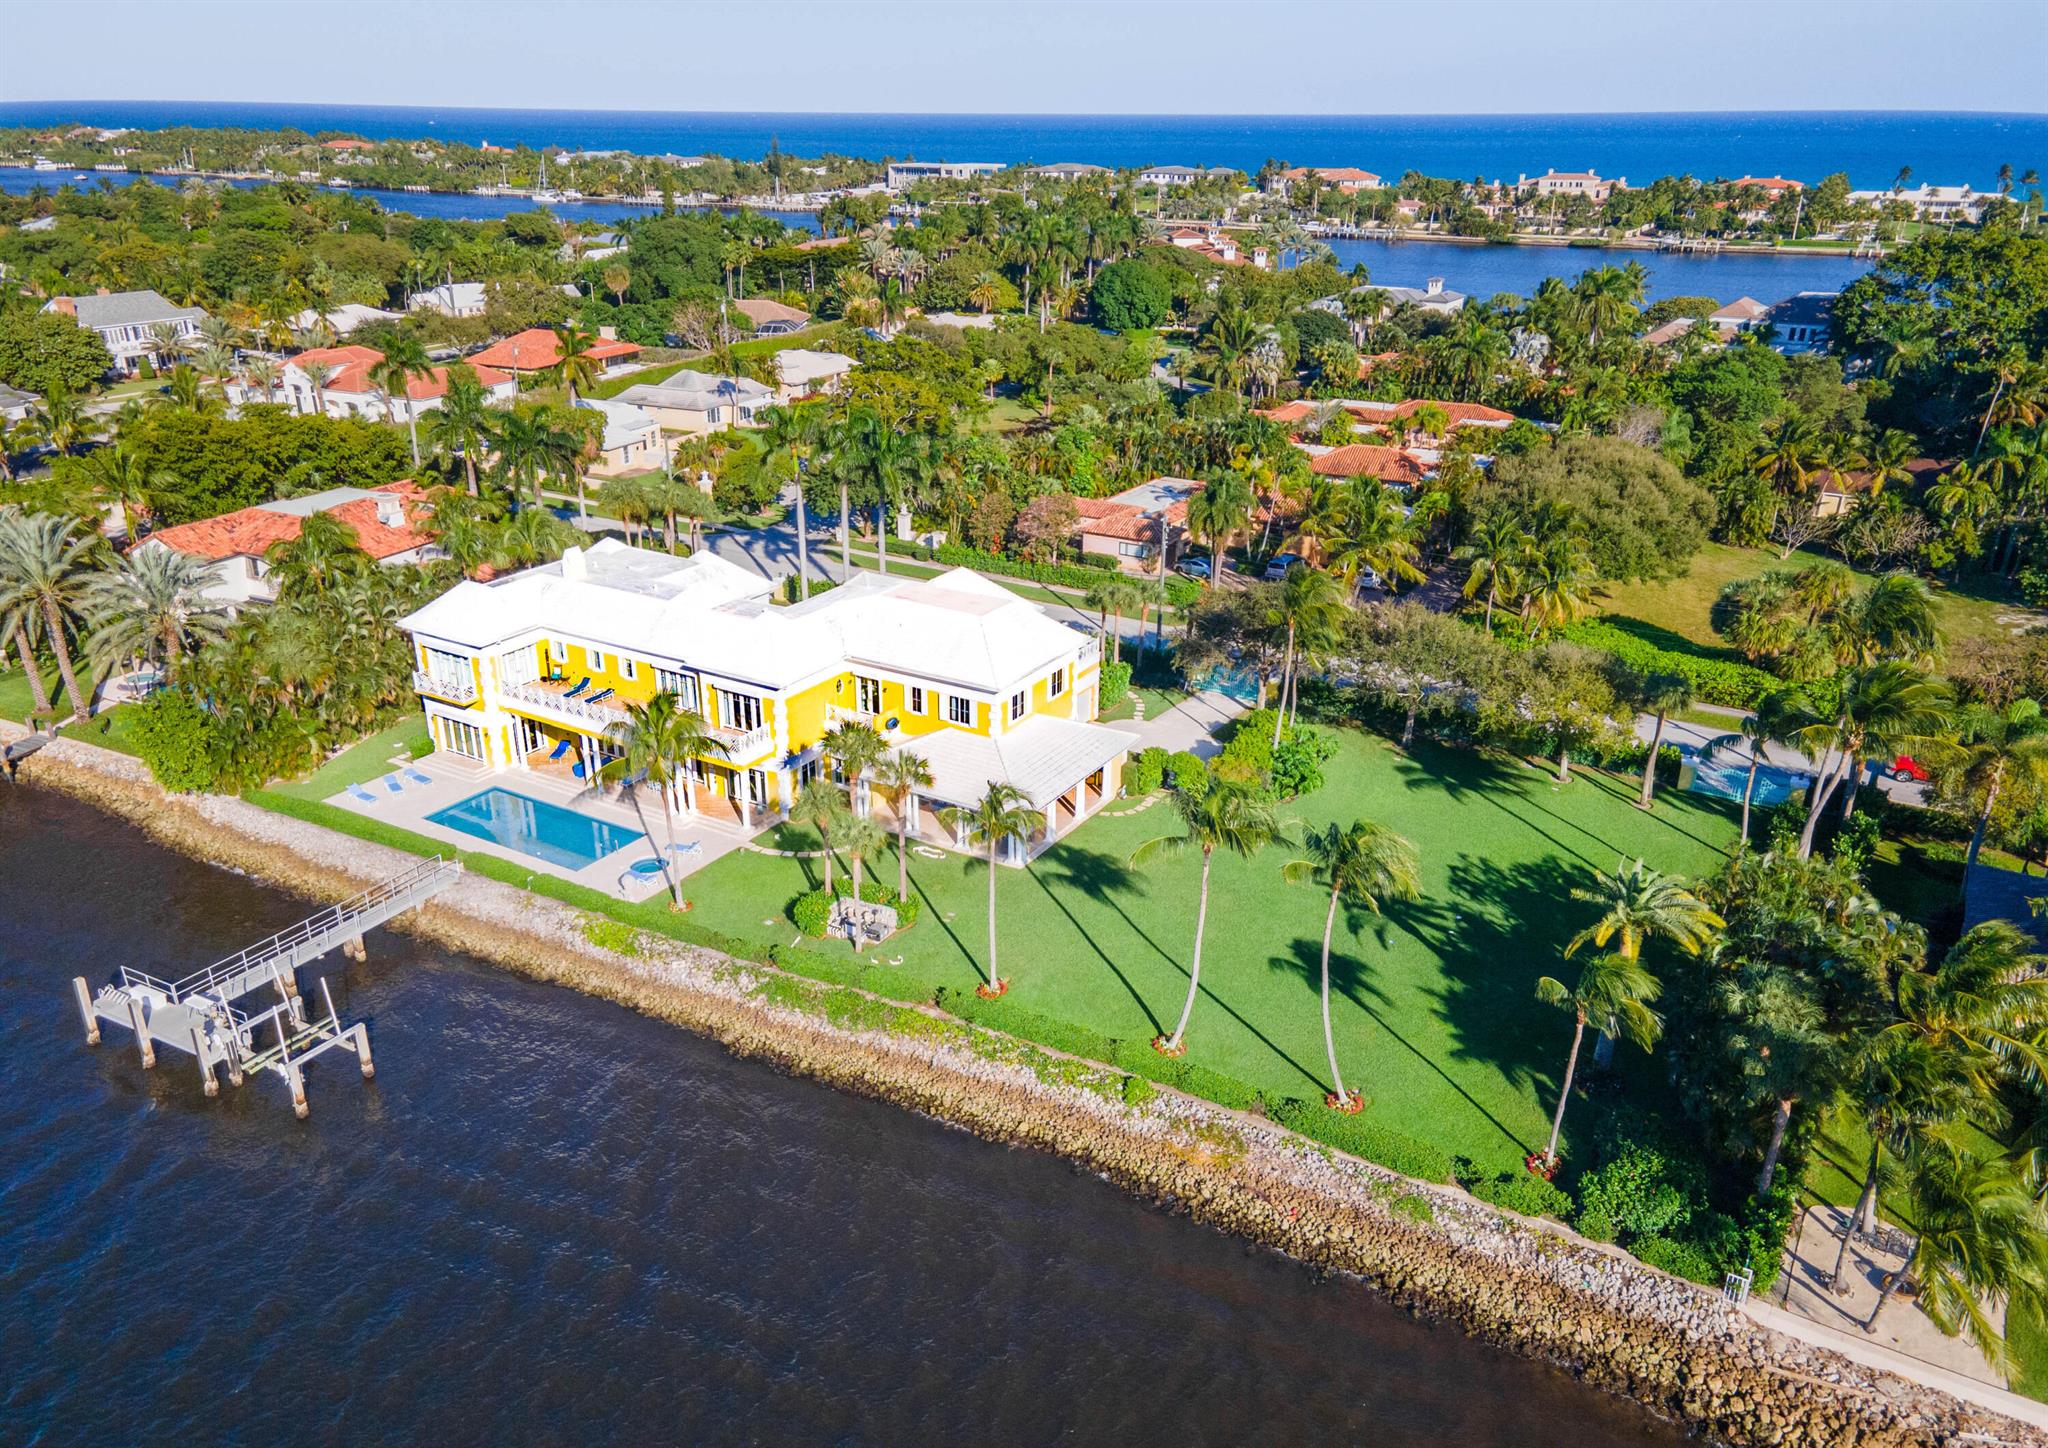 Grand Waterfront Estate with nearly 300 feet on the wide intracoastal and a short drive south of palm beach, this absolutely stunning gated estate boasts 12.828 sq ft with 7 bed rooms and 8.5 baths. This home features 12 ft ceilings thought out, a large upstairs master suit serviced by private elevator, formal living room and dinning rooms, den, media, study and sensational family room that opens to a large covered Loggia with summer kitchen, impact resistant French style doors and oversized windows create a bright and airy interior. Oversized pool and spa are finished in glass mosaic tile, the doc can accommodate a 140 ft yacht. This home is in move in condition with large laundry room with 2 commercial size washer and dryers plus a huge 4 car garage are but a few of the other highlights